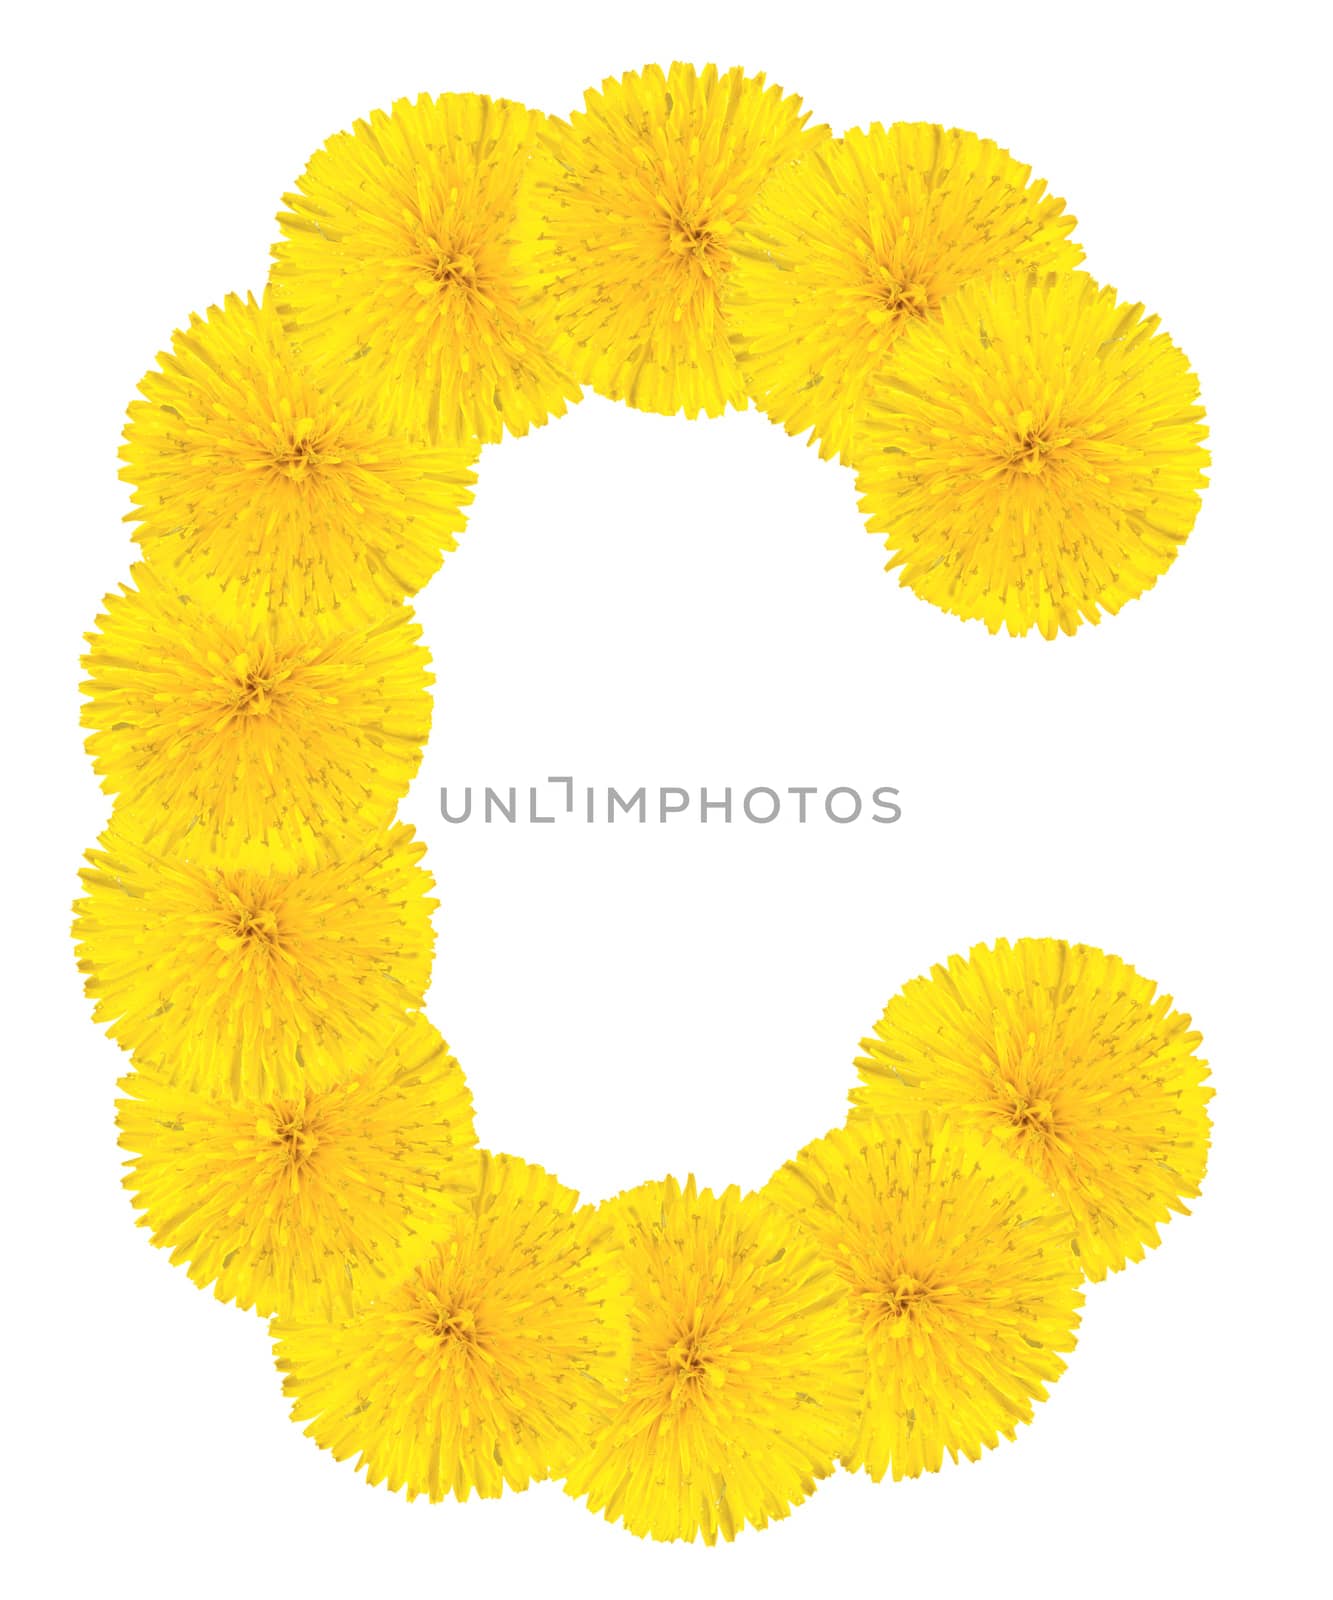 Letter C made from dandelion flowers isolated on white background